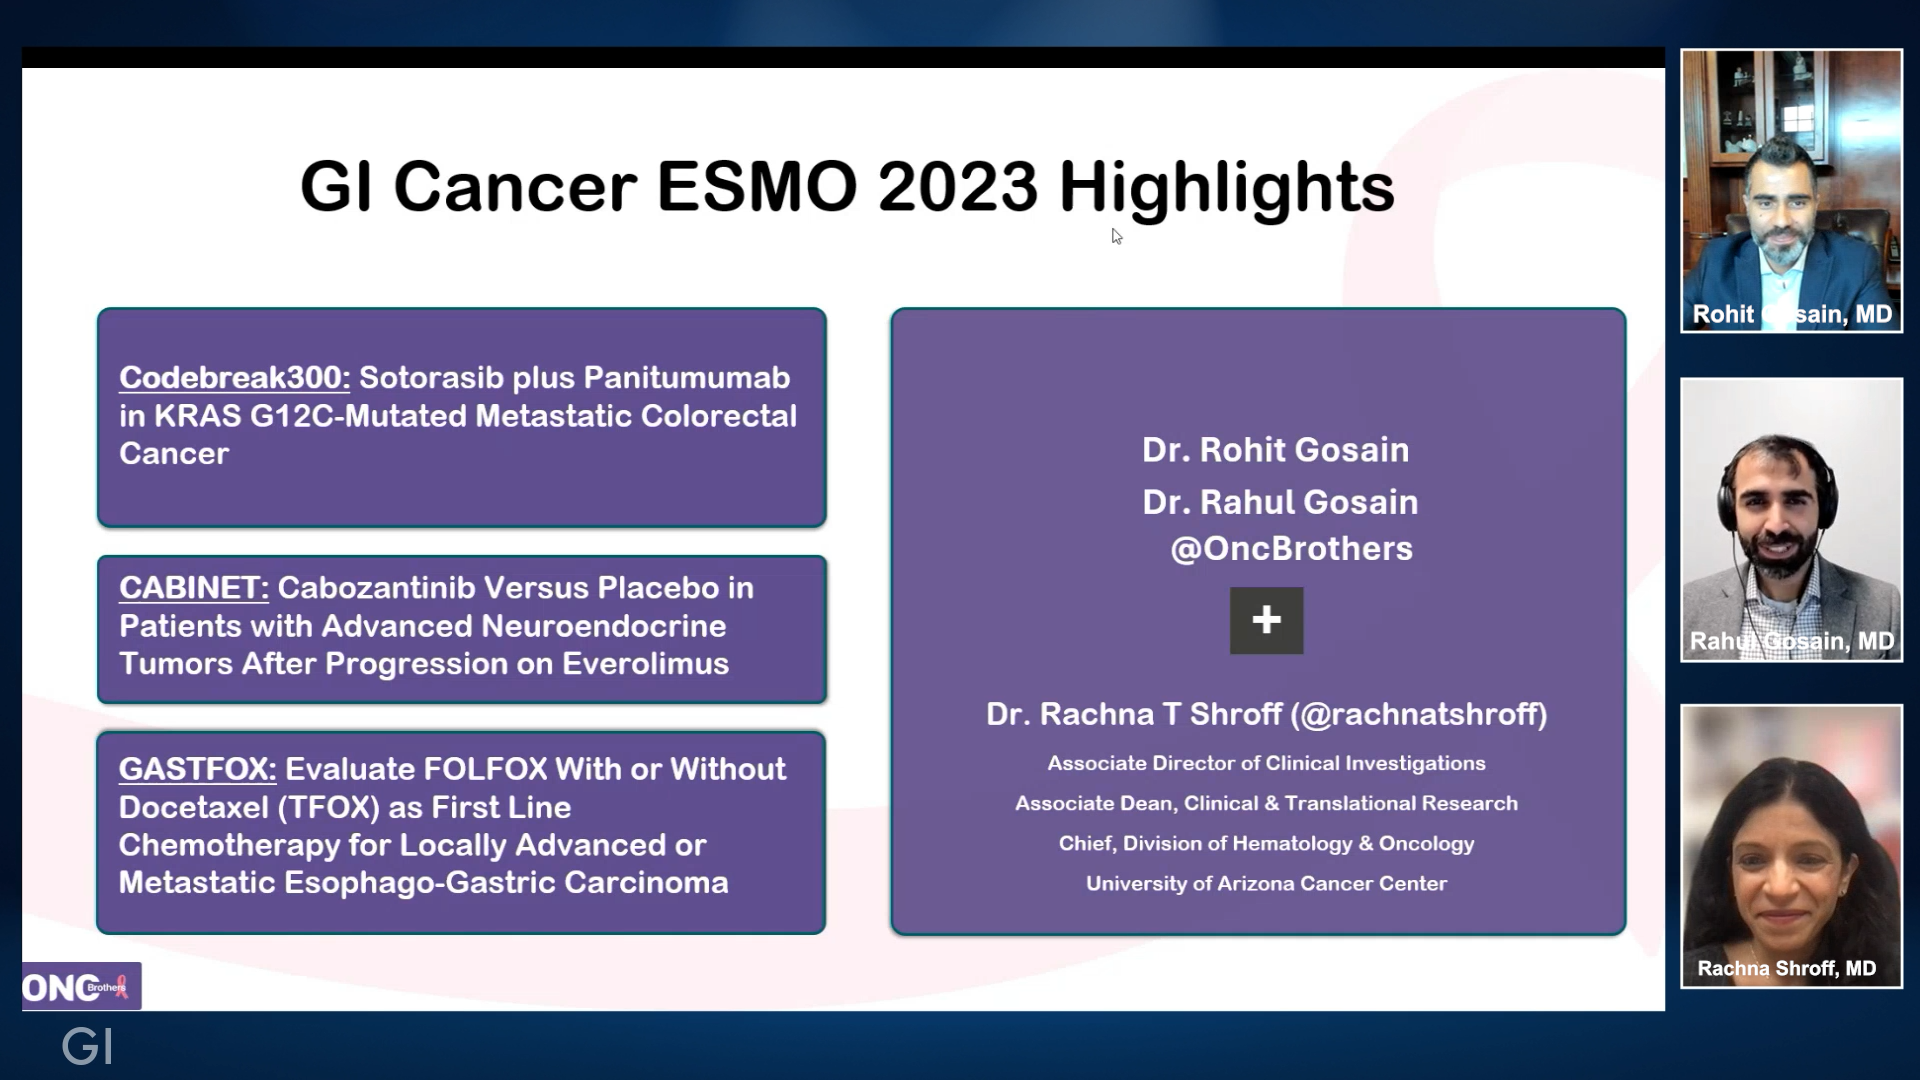 GASTFOX: Evaluate FOLFOX With or Without Docetaxel (TFOX) as First-Line Chemotherapy for Locally Advanced or Metastatic Esophago-Gastric Carcinoma